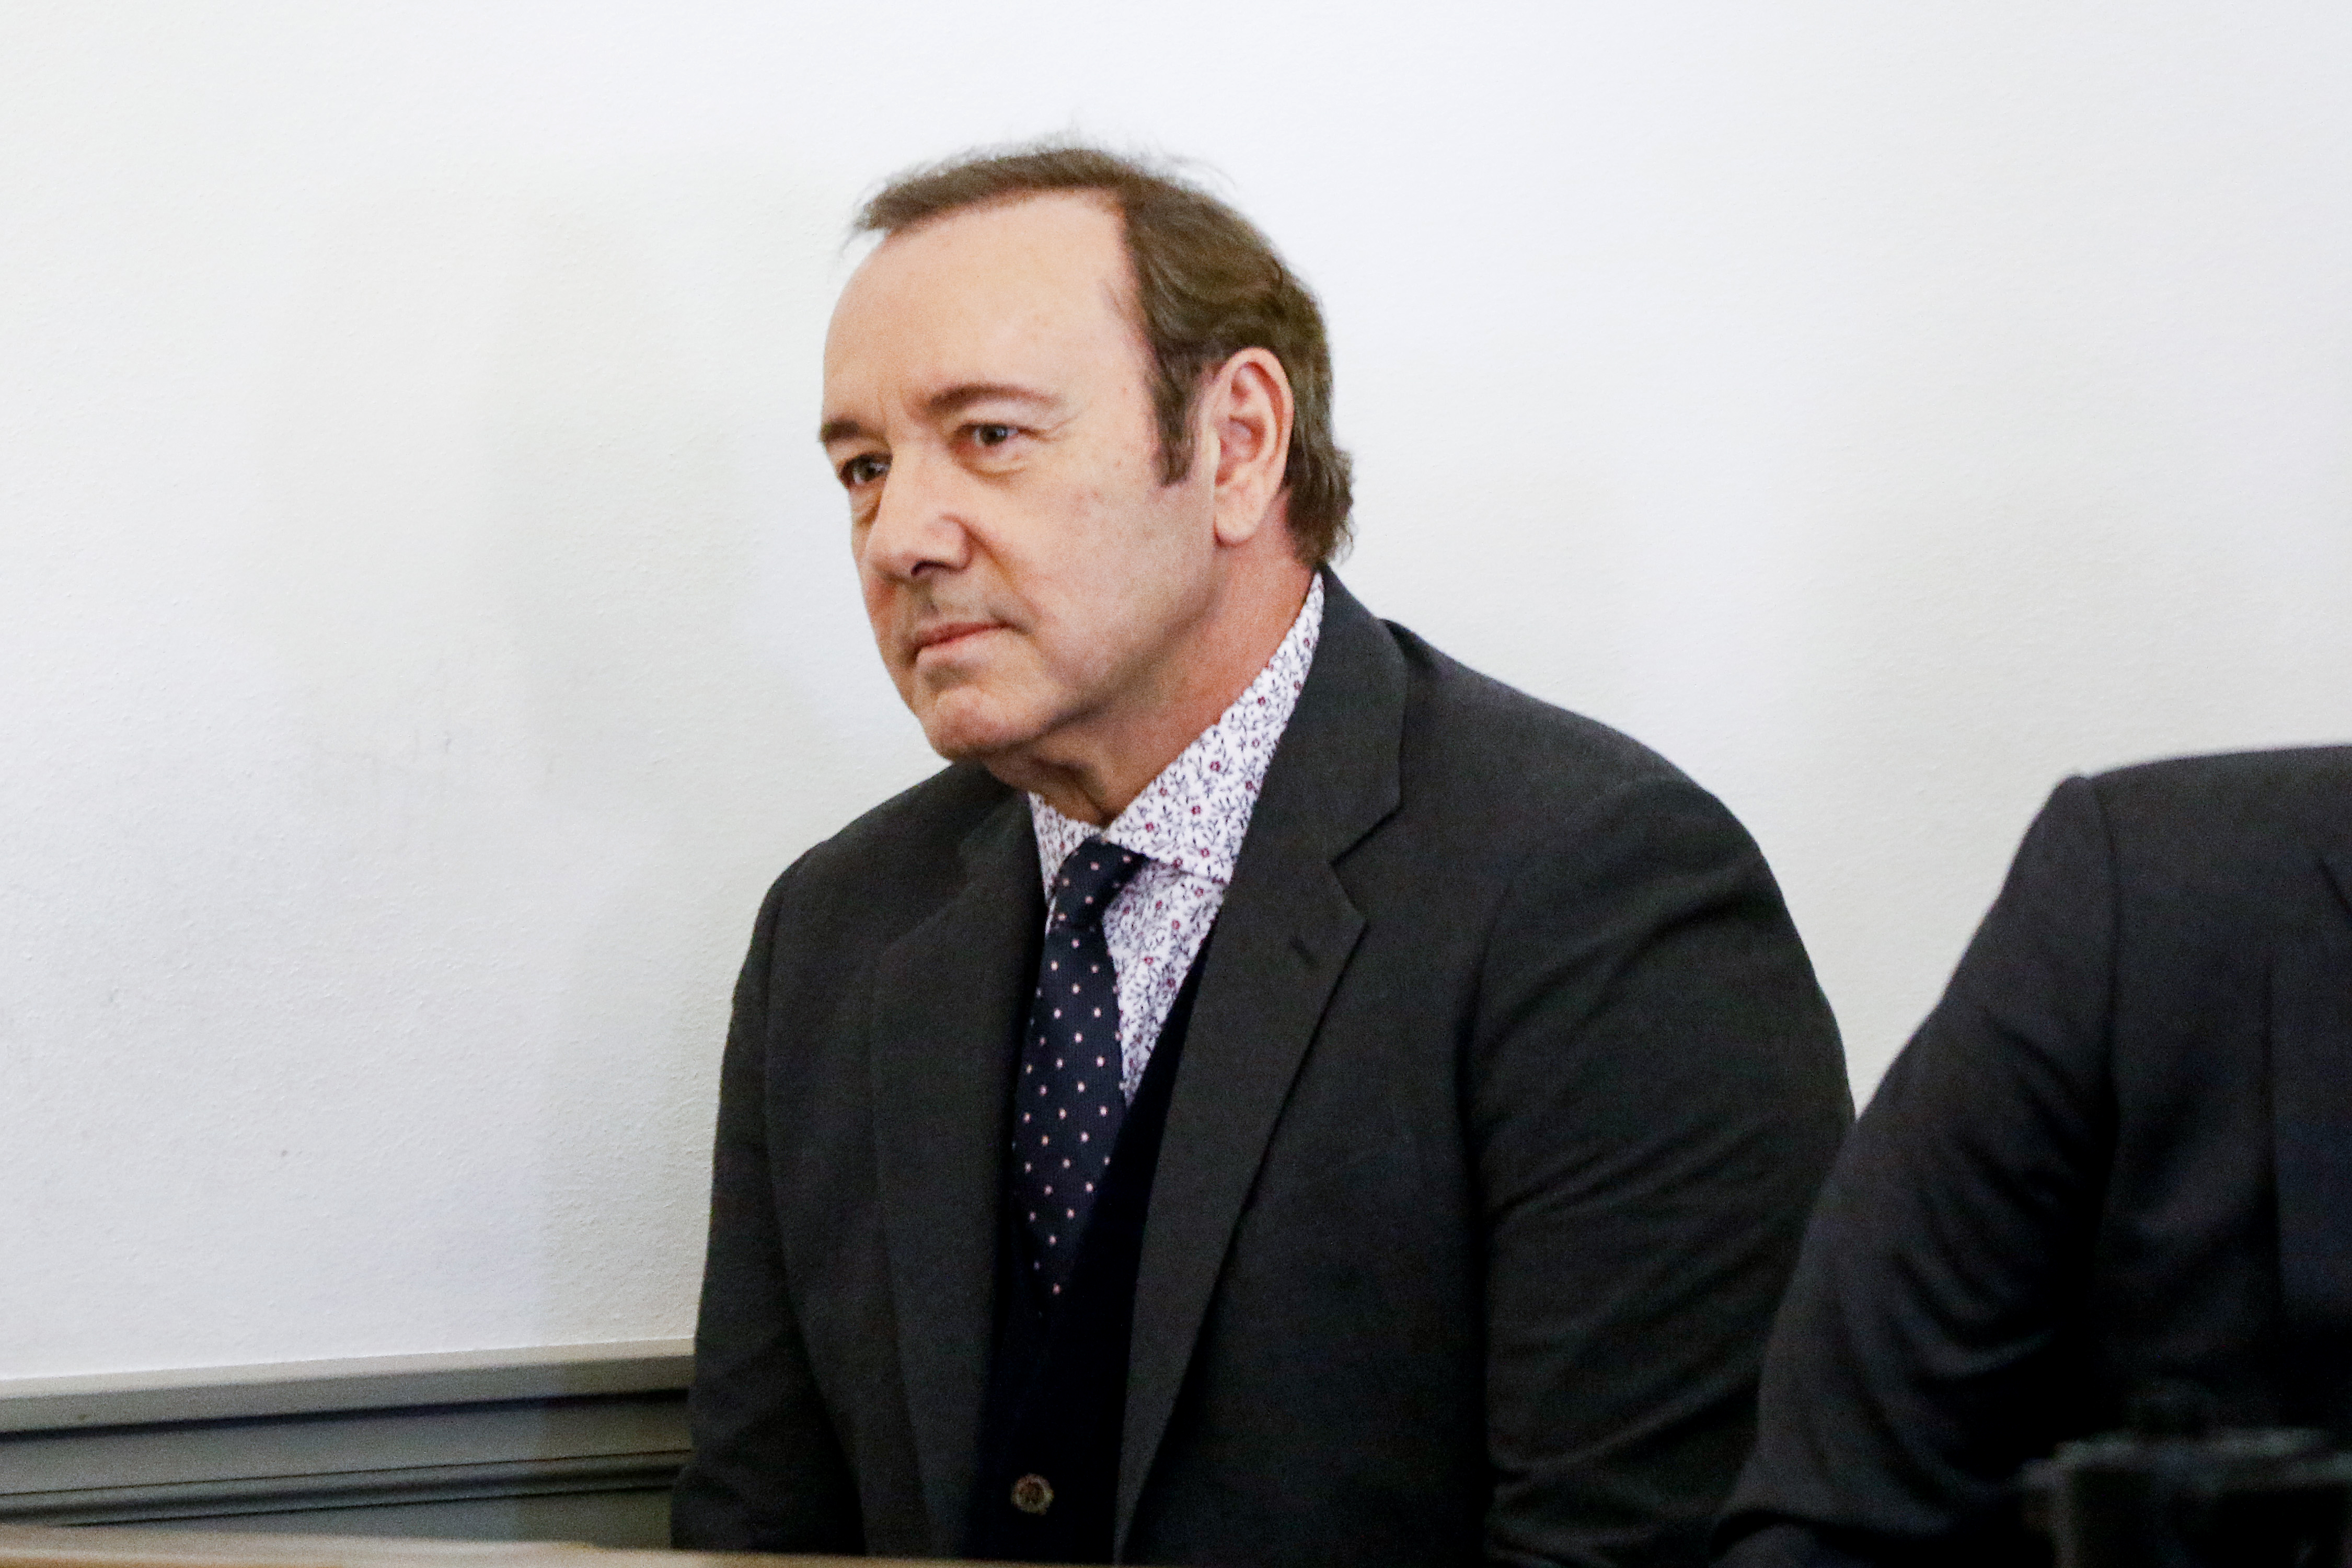 Kevin Spacey Charged With 4 Counts Of Sexual Assault